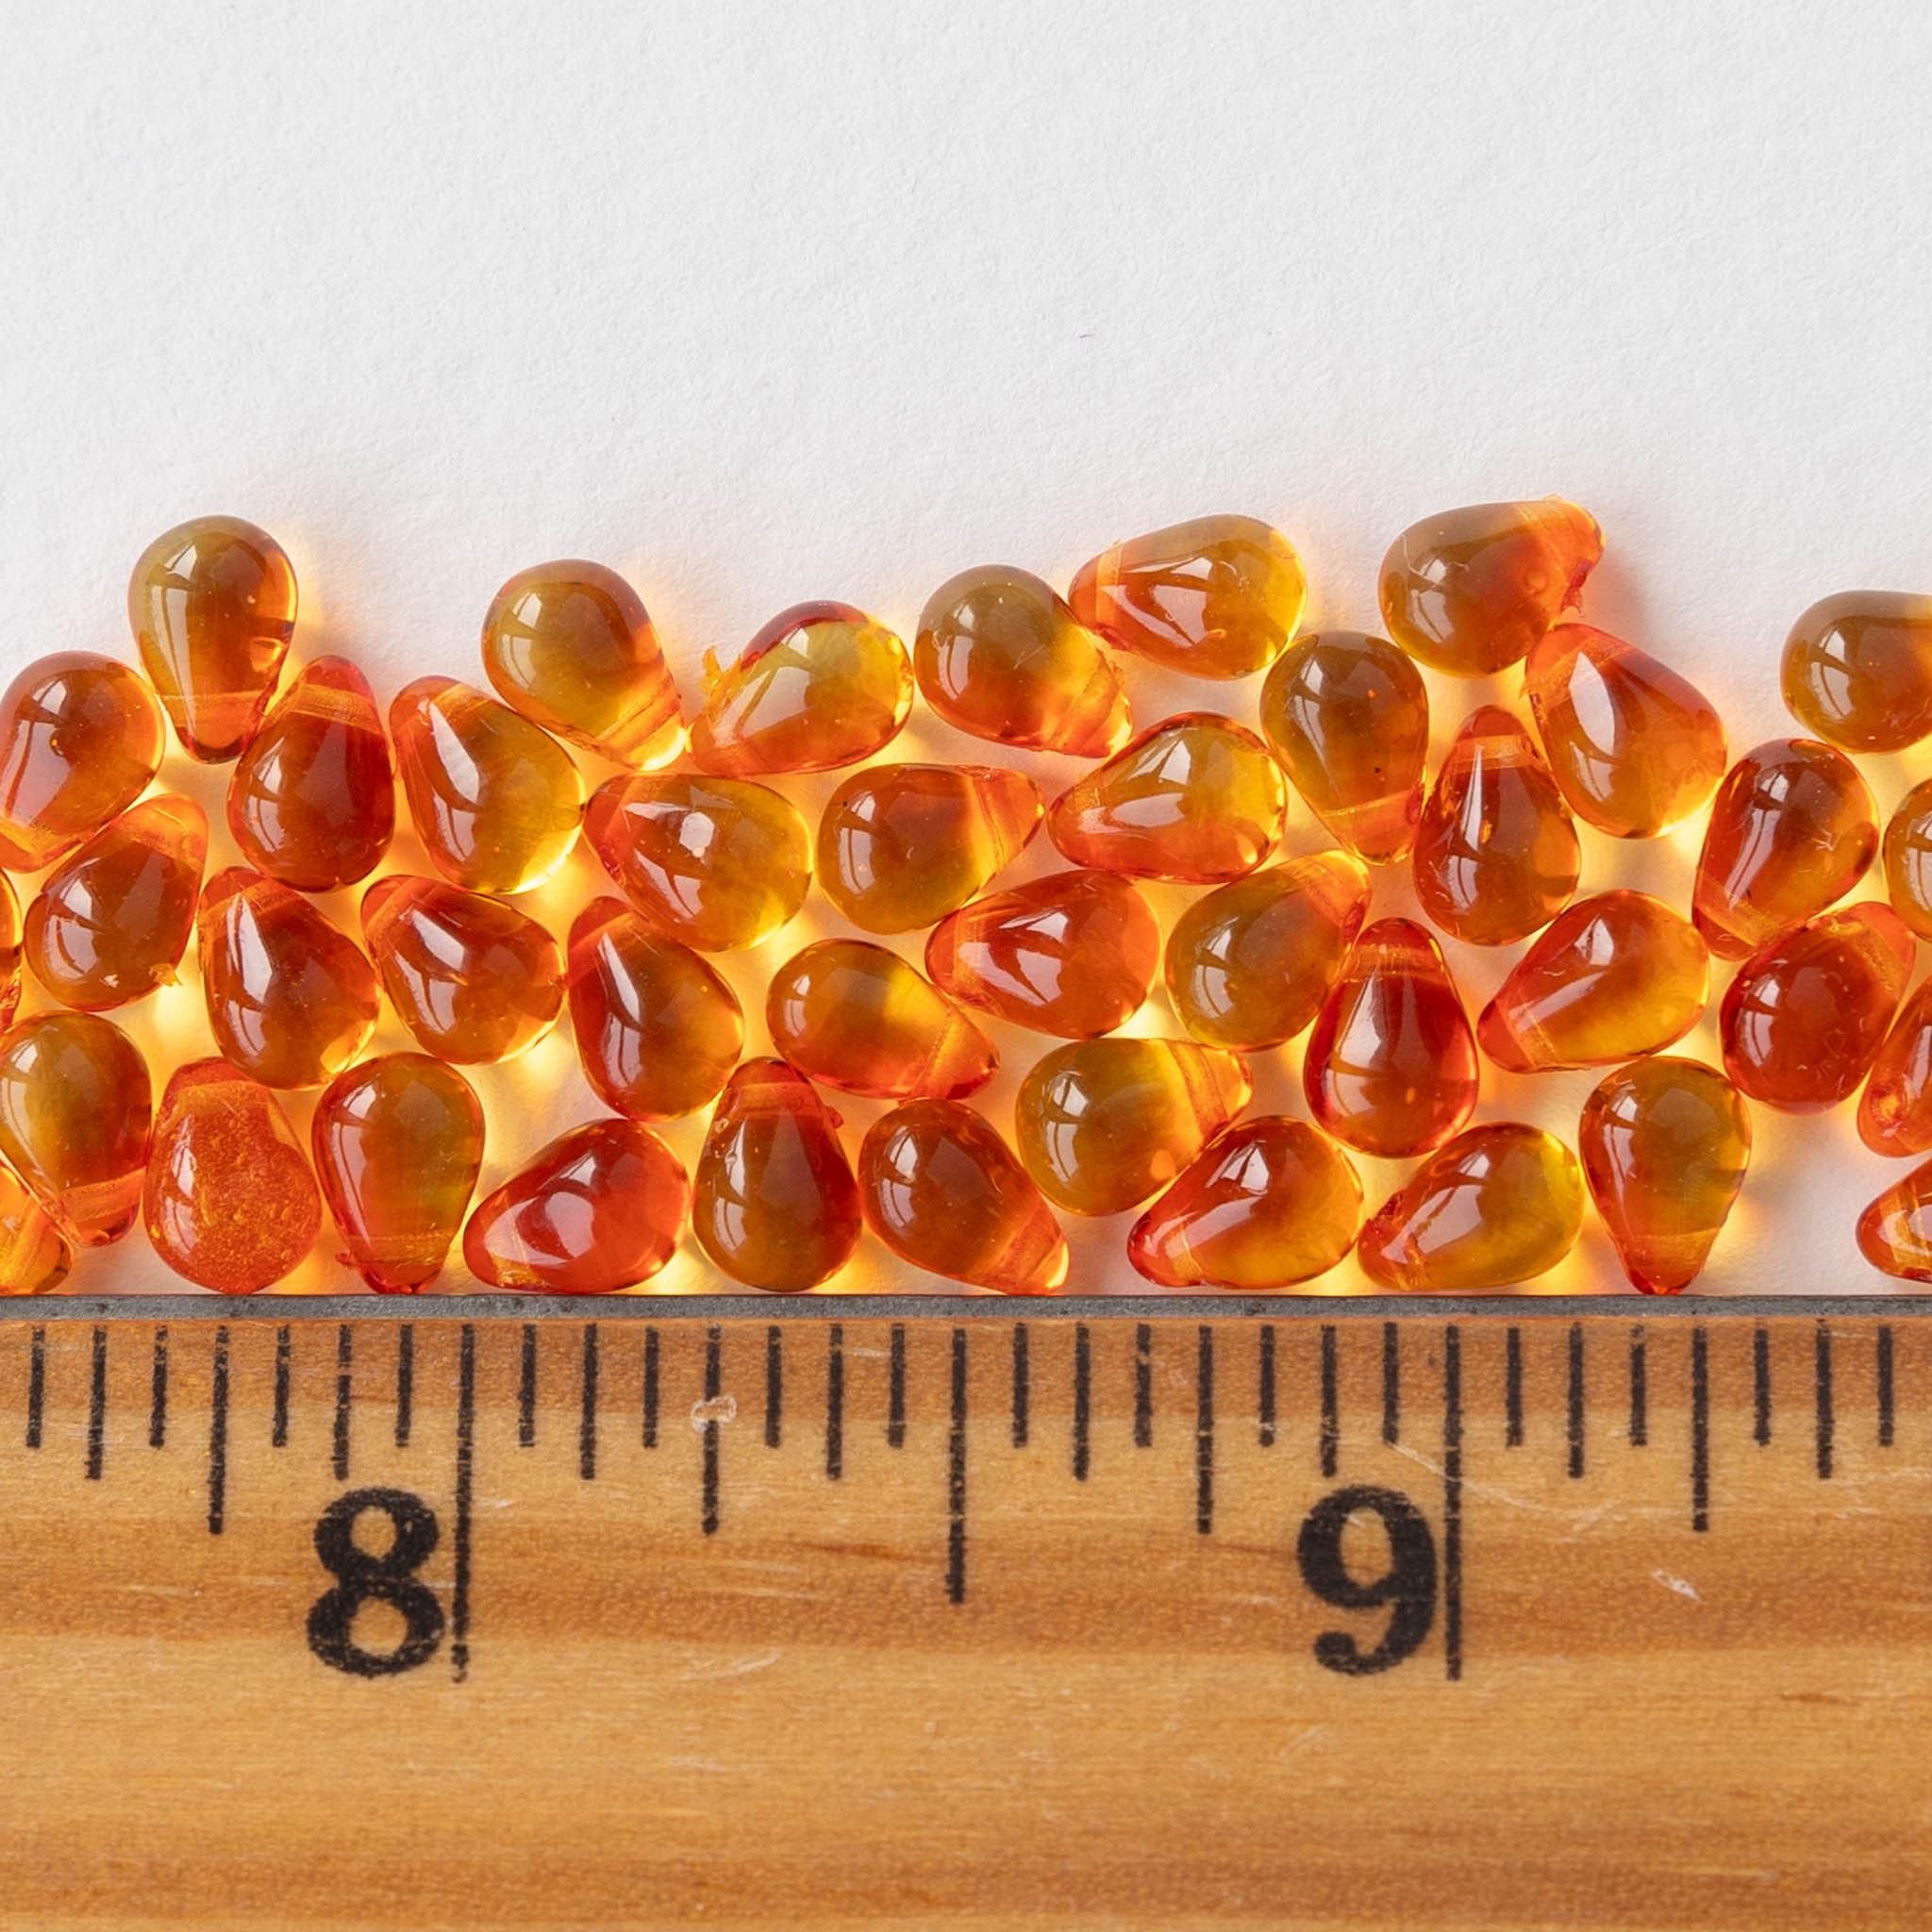 6x4mm Teardrop Beads for Jewelry Making Glass Tear Drop Beads 4x6mm Hot  Pink 80 Drops Smooth Briolette Beads 